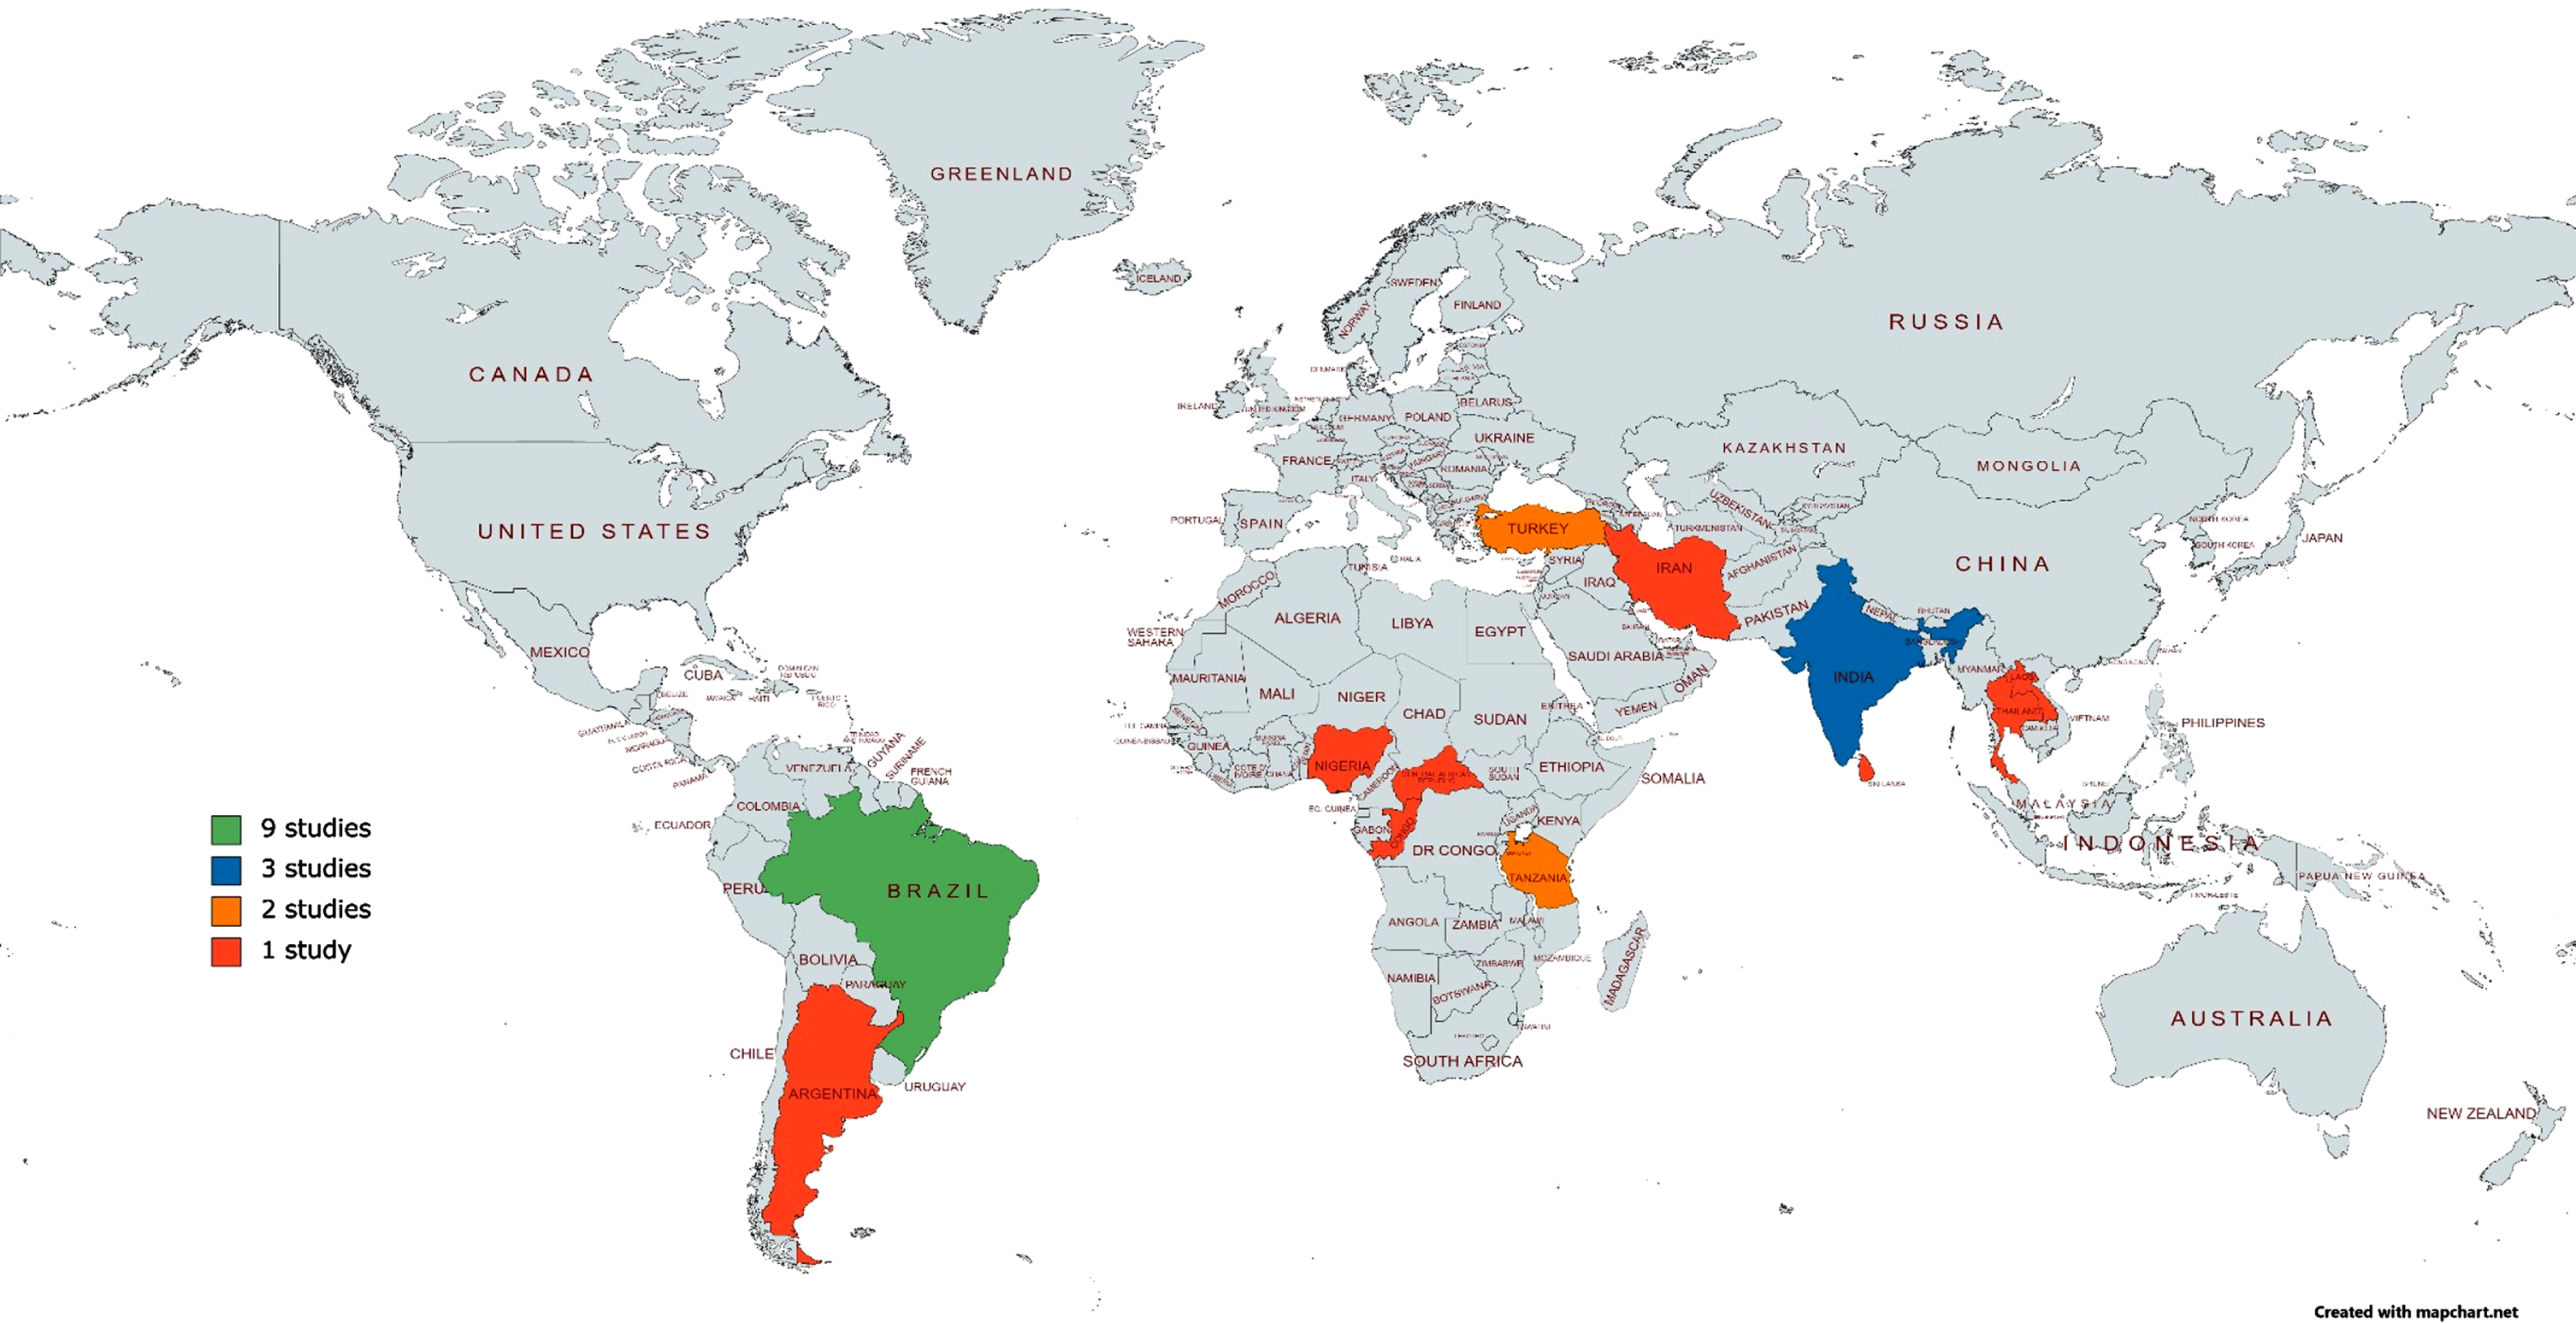 Heat map of locations for research into the development, adaption, and validation of assessments for instrumental activities of daily living to support dementia diagnosis in low-middle income countries.